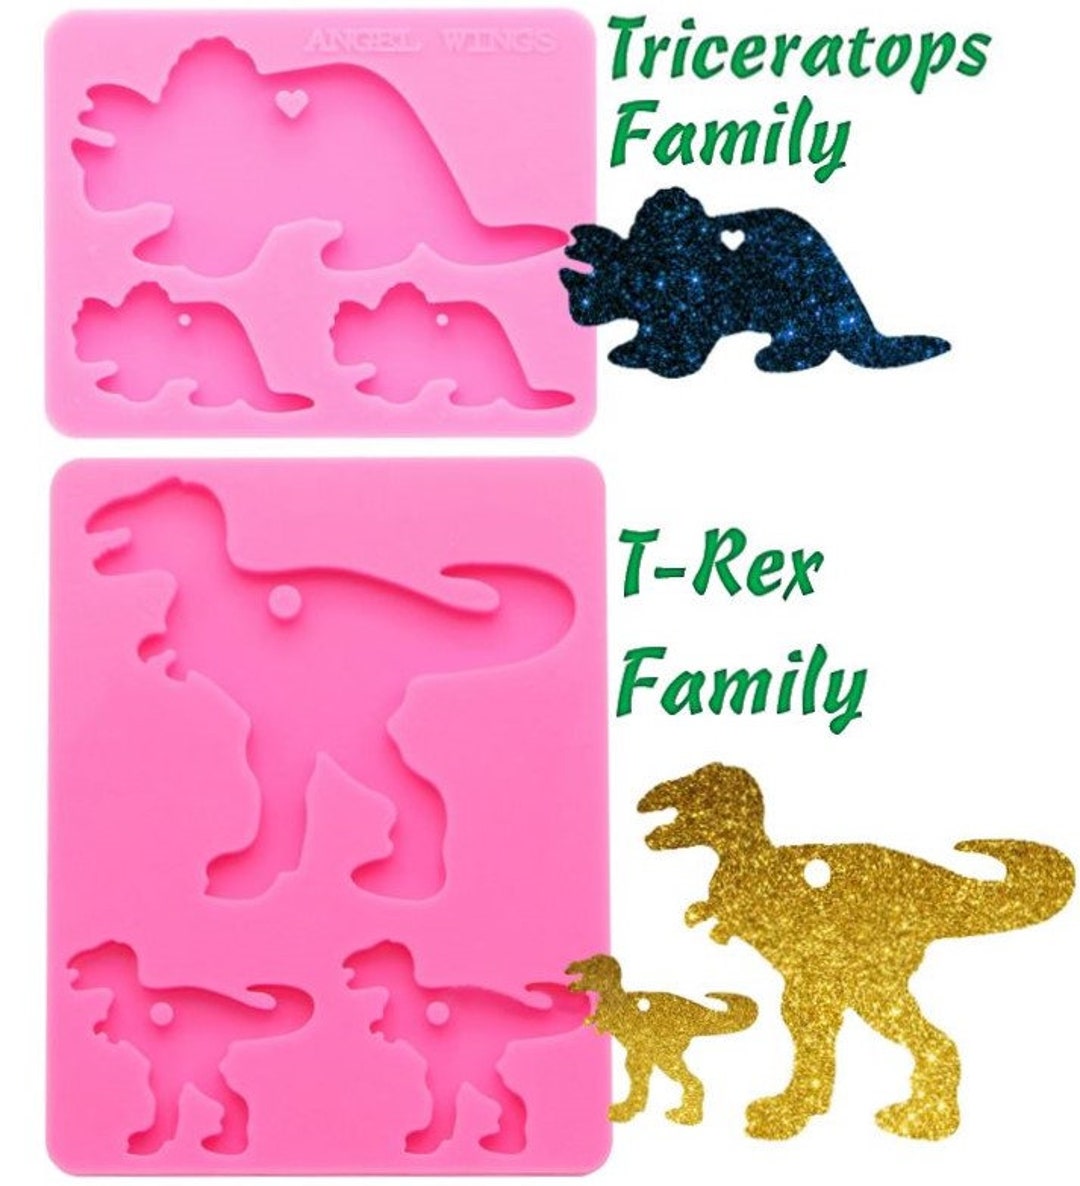 Dinosaur Family Mold Shiny Silicone / T-rex or Triceratops / Key Chain /  DIY Jewelry / Prehistoric Teaching Aid / Ornaments 